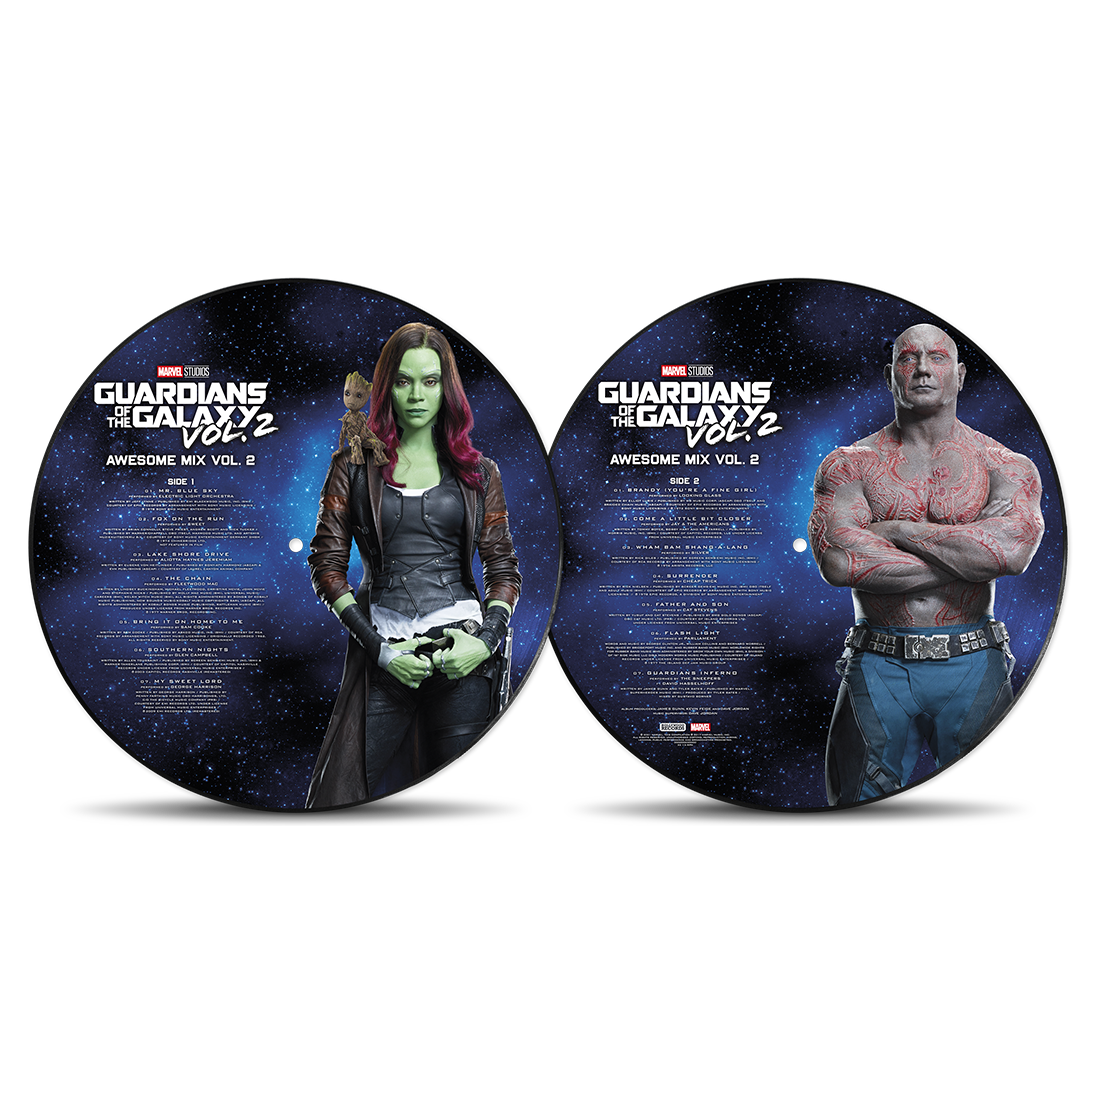 Various Artists - Guardians of the Galaxy Vol. 2 - Awesome Mix Vol. 2: Vinyl Picture Disc LP